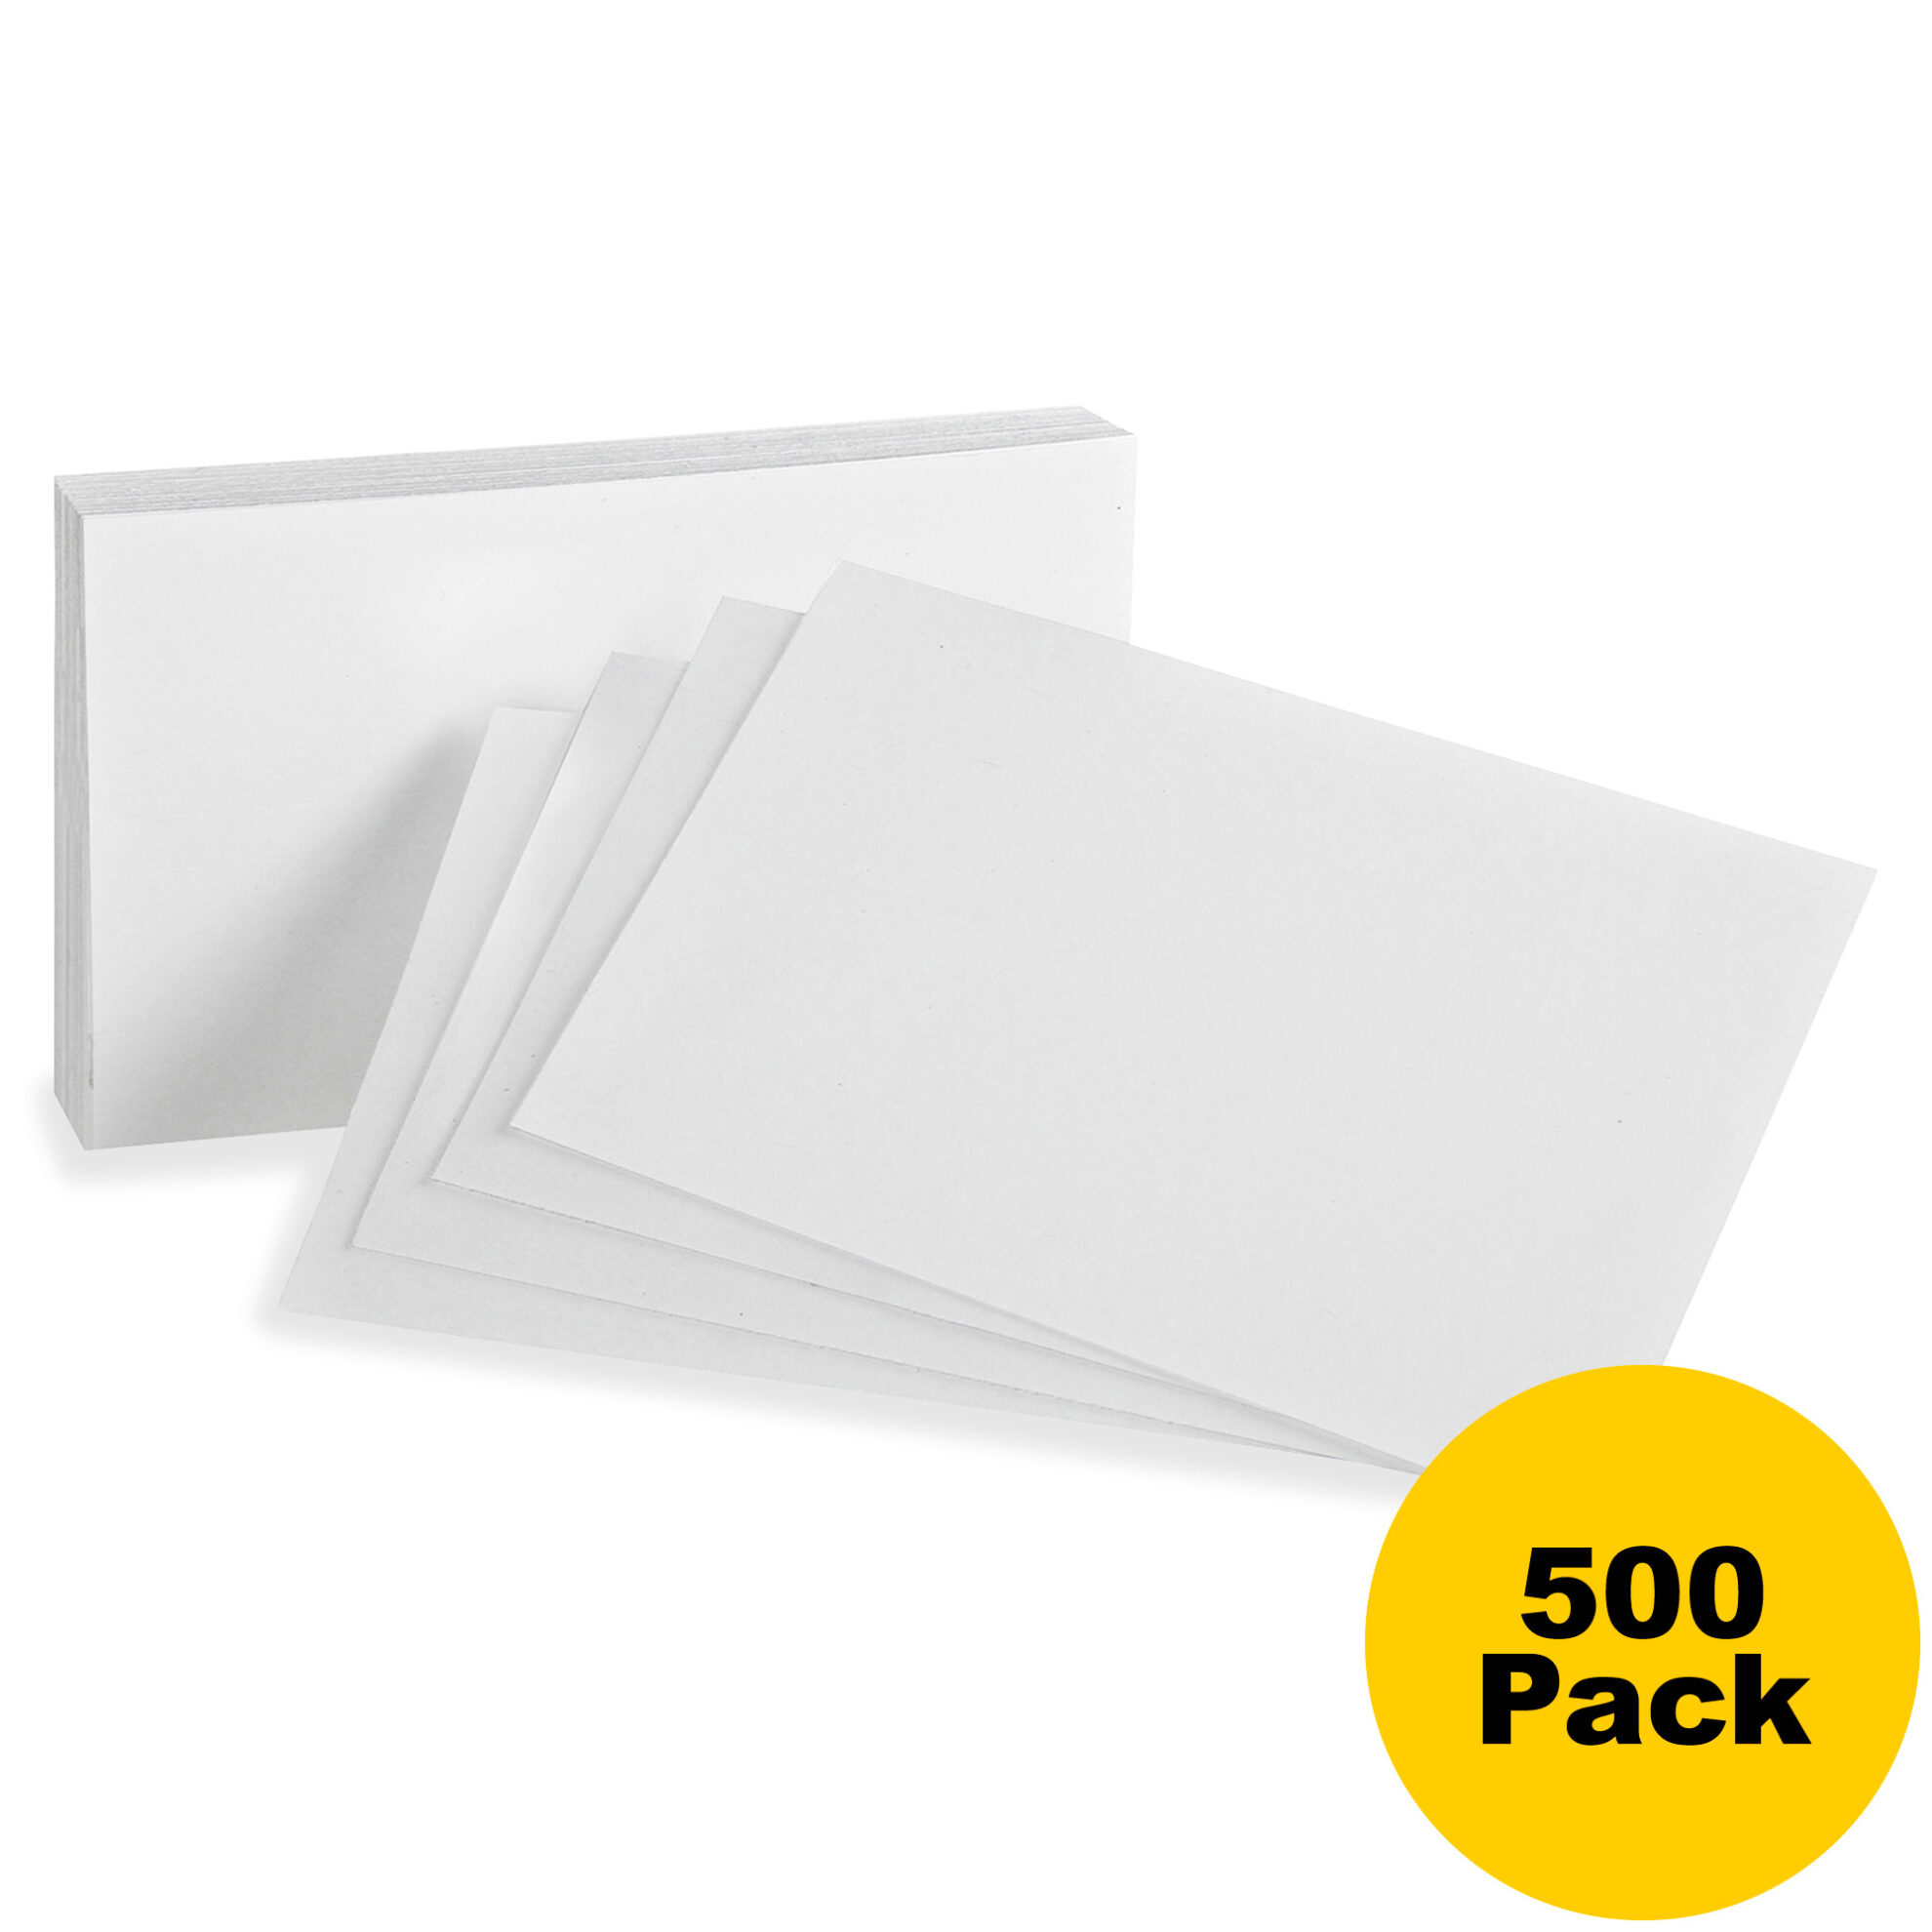 oxford-printable-index-card-3-x-5-85-lb-basis-weight-500-bundle-white-within-3-by-5